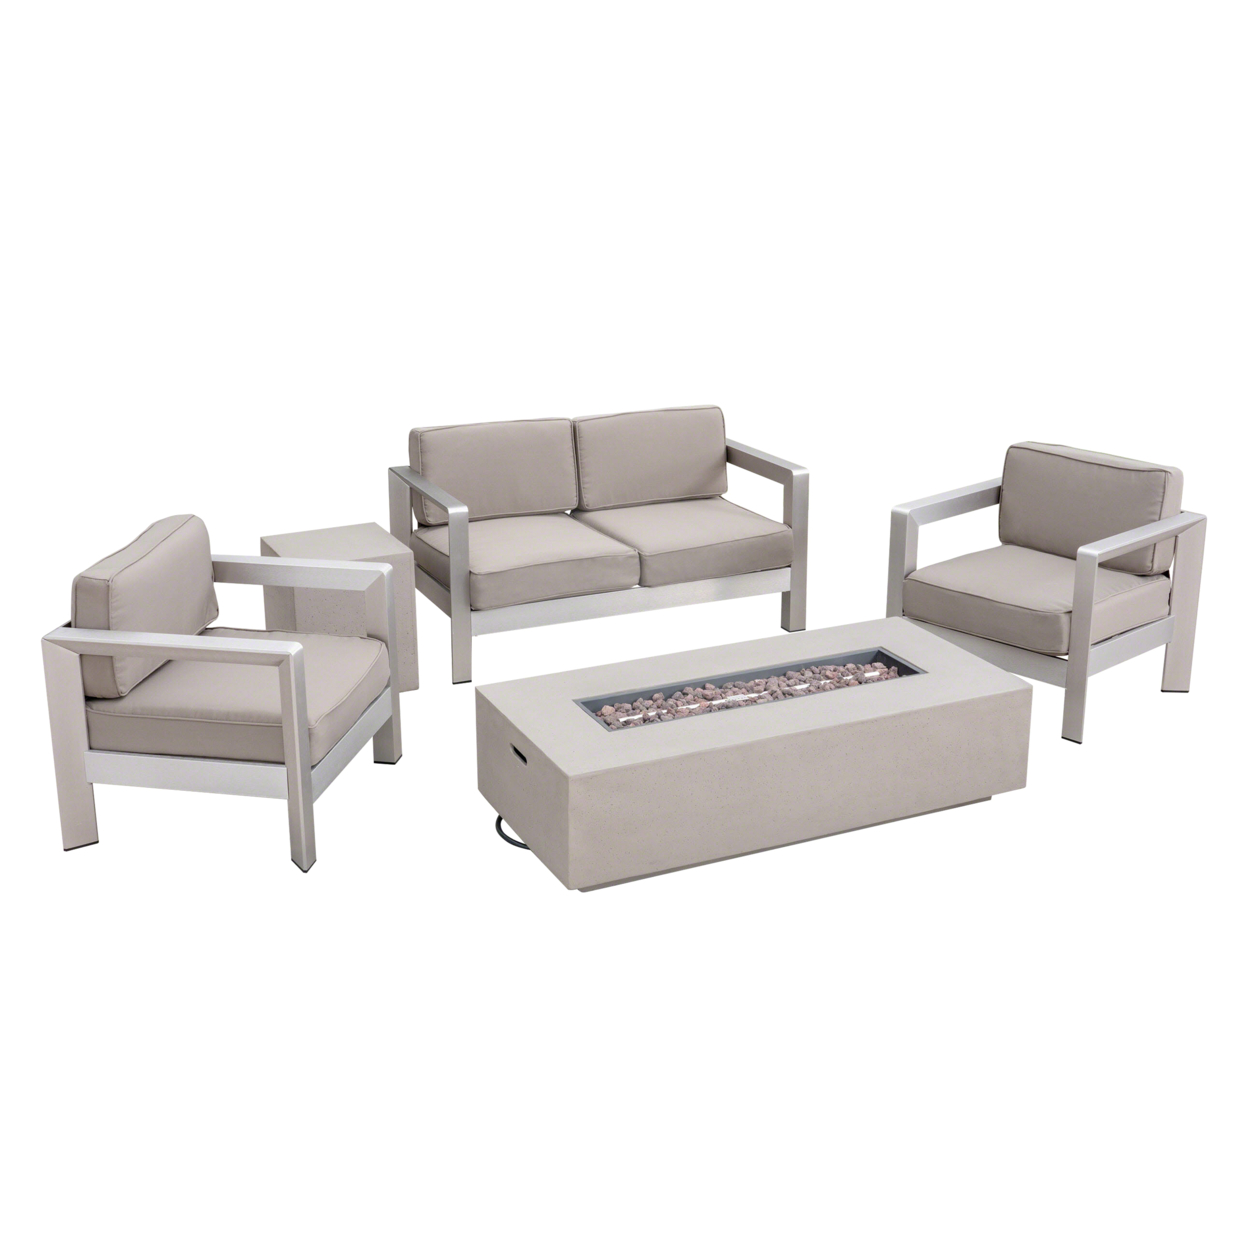 Alec Outdoor 4-Seater Aluminum Chat Set With Fire Pit And Tank Holder - Silver + Khaki + Light Gray